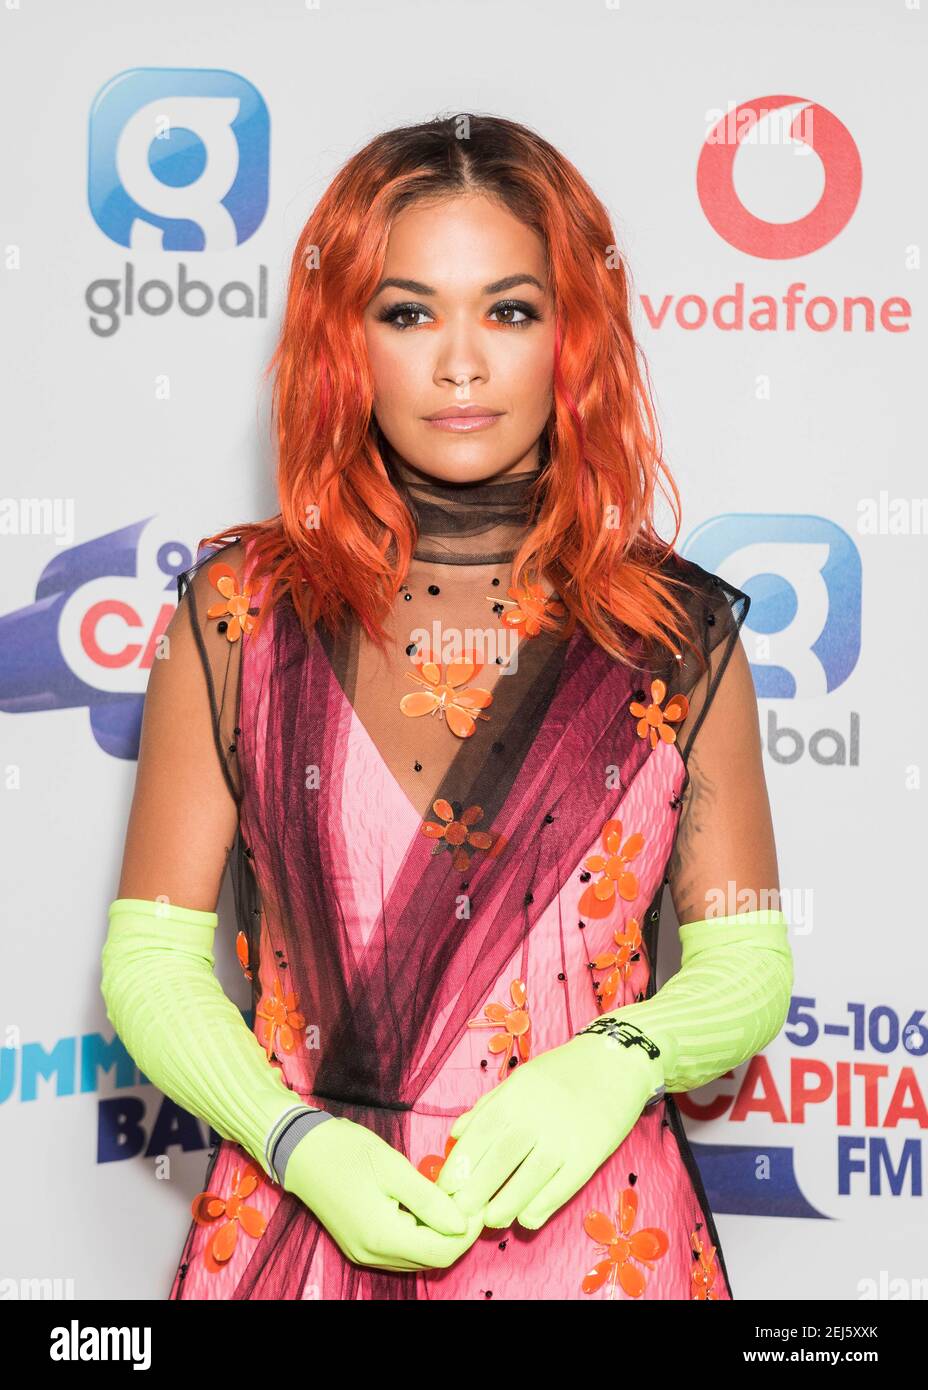 Rita Ora on the red carpet of the media run at Capital's Summertime Ball with Vodafone at Wembley Stadium, London. This summer's hottest artists performed live for 80,000 Capital listeners at Wembley Stadium at the UK's biggest summer party. Performers included Camila Cabello, Shawn Mendes, Rita Ora, Charlie Puth, Jess Glyne, Craig David, Anne-Marie, Rudimental, Sean Paul, Clean Bandit, James Arthur, Sigala, Years & Years, Jax Jones, Raye, Jonas Blue, Mabel, Stefflon Don, Yungen and G-Eazy Stock Photo